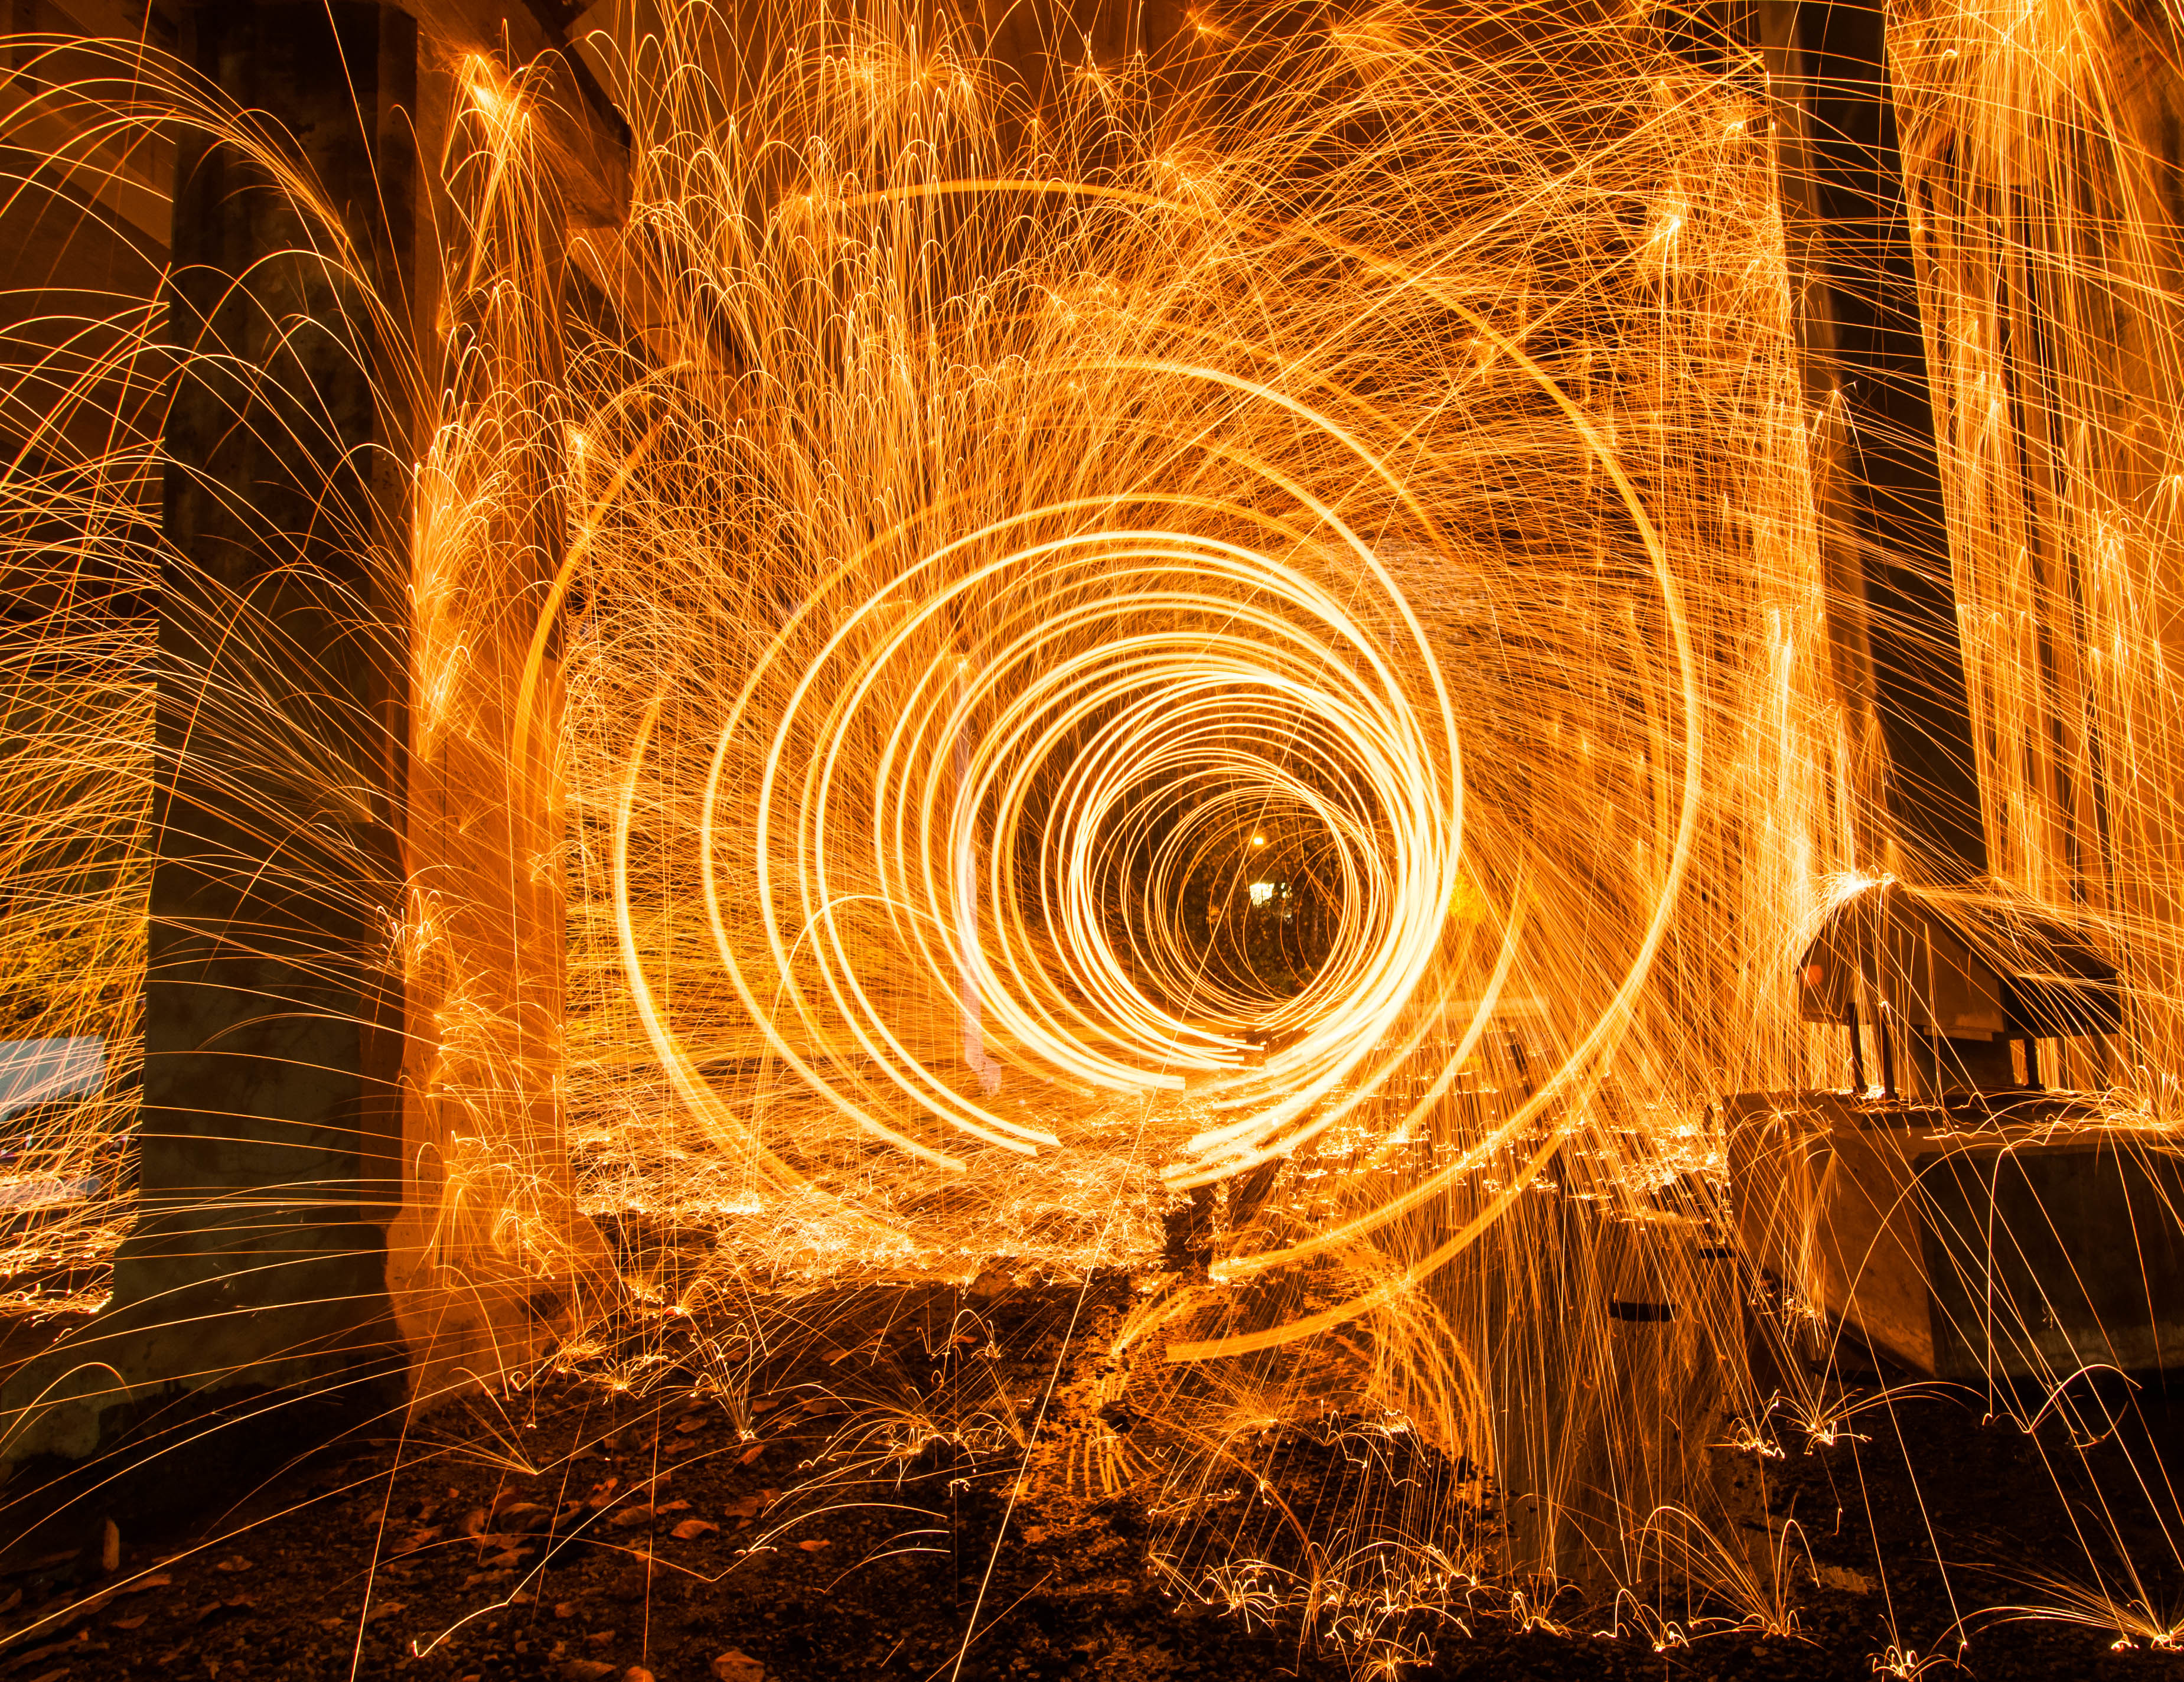 long exposure, light, abstract, circles, shine, sparks, freezelight wallpaper for mobile